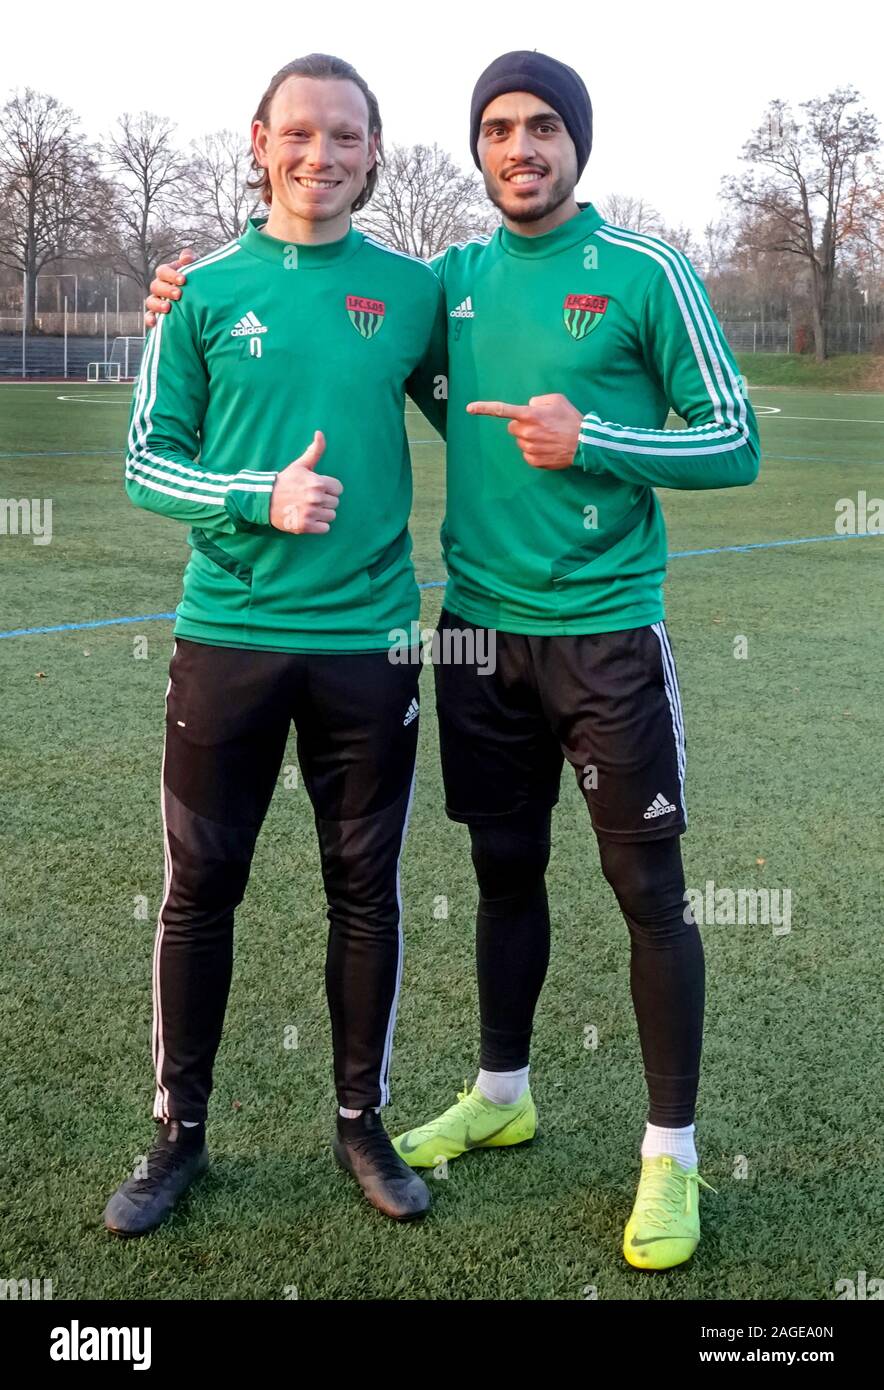 Schweinfurt, Germany. 05th Dec, 2019. Christian Köppel (l) and Mohamad  Awata (r), soccer player at the 1st FC Schweinfurt 1905, are standing on  the training ground. Awata was a professional soccer player